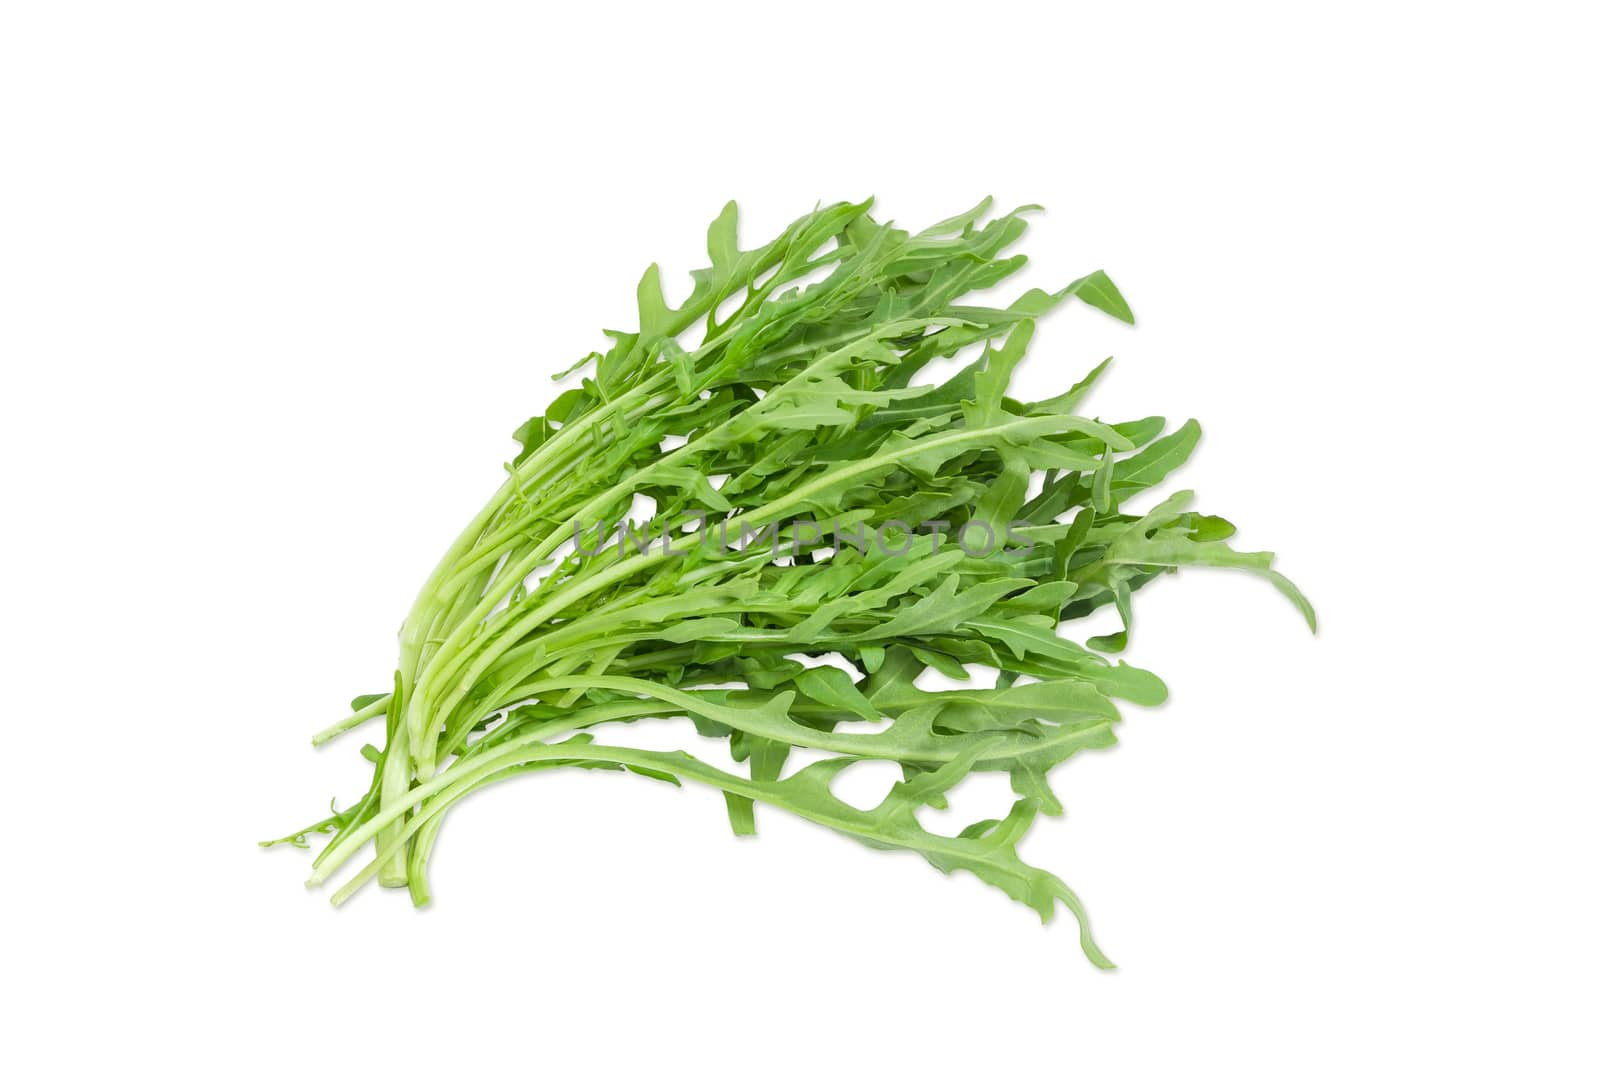 Bunch of the arugula on a light background by anmbph